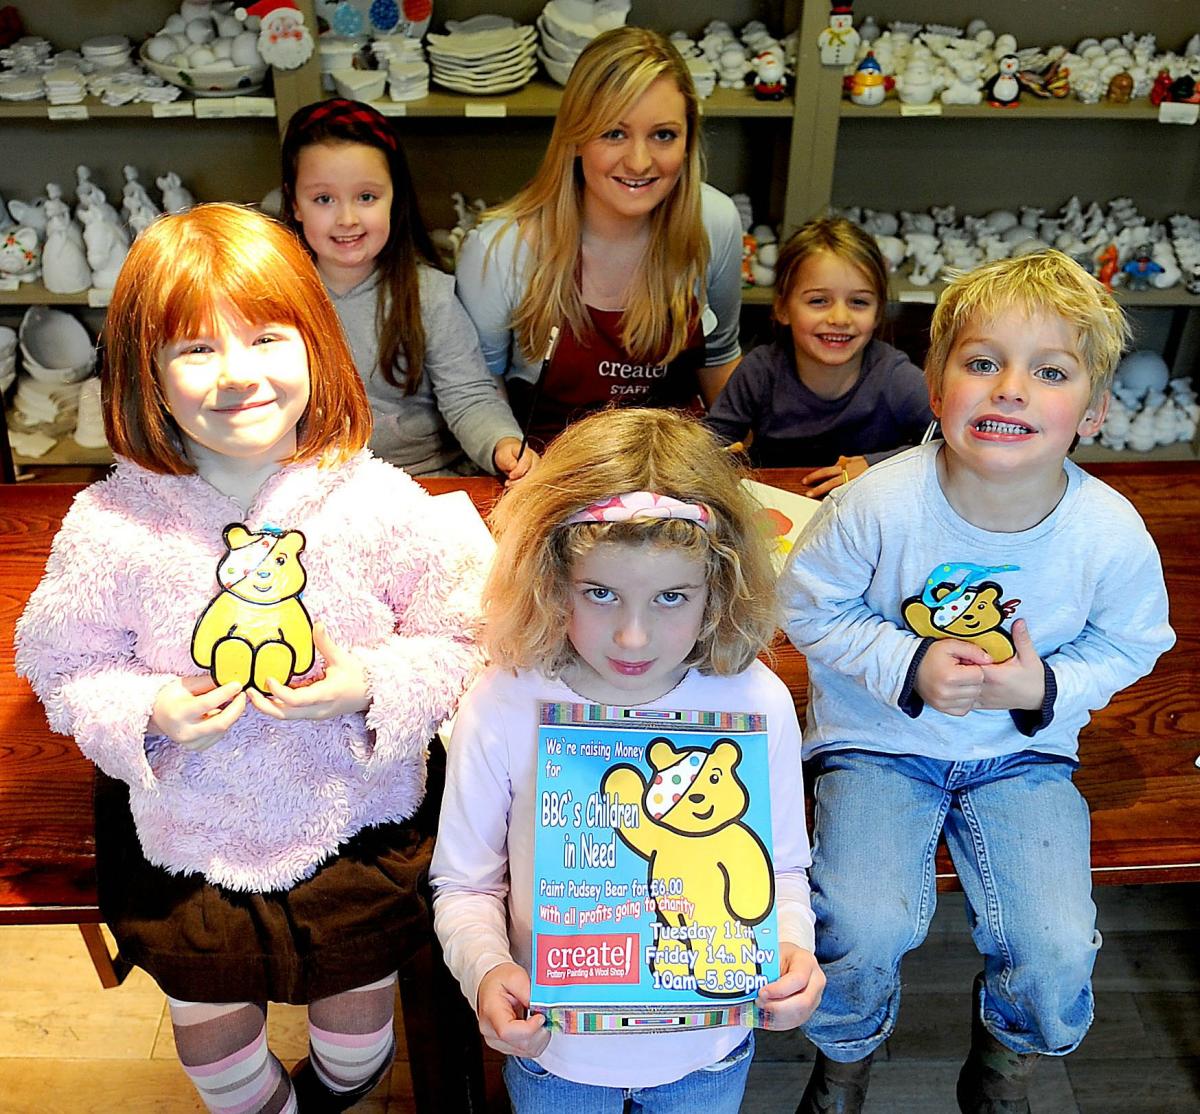 From the left, back,Anya Kennedy, eight, Charlotte Johansson and Lucy Allen, six. Front, Amelia Milner, six, Marissa Allen, six, and Tom Allen, four